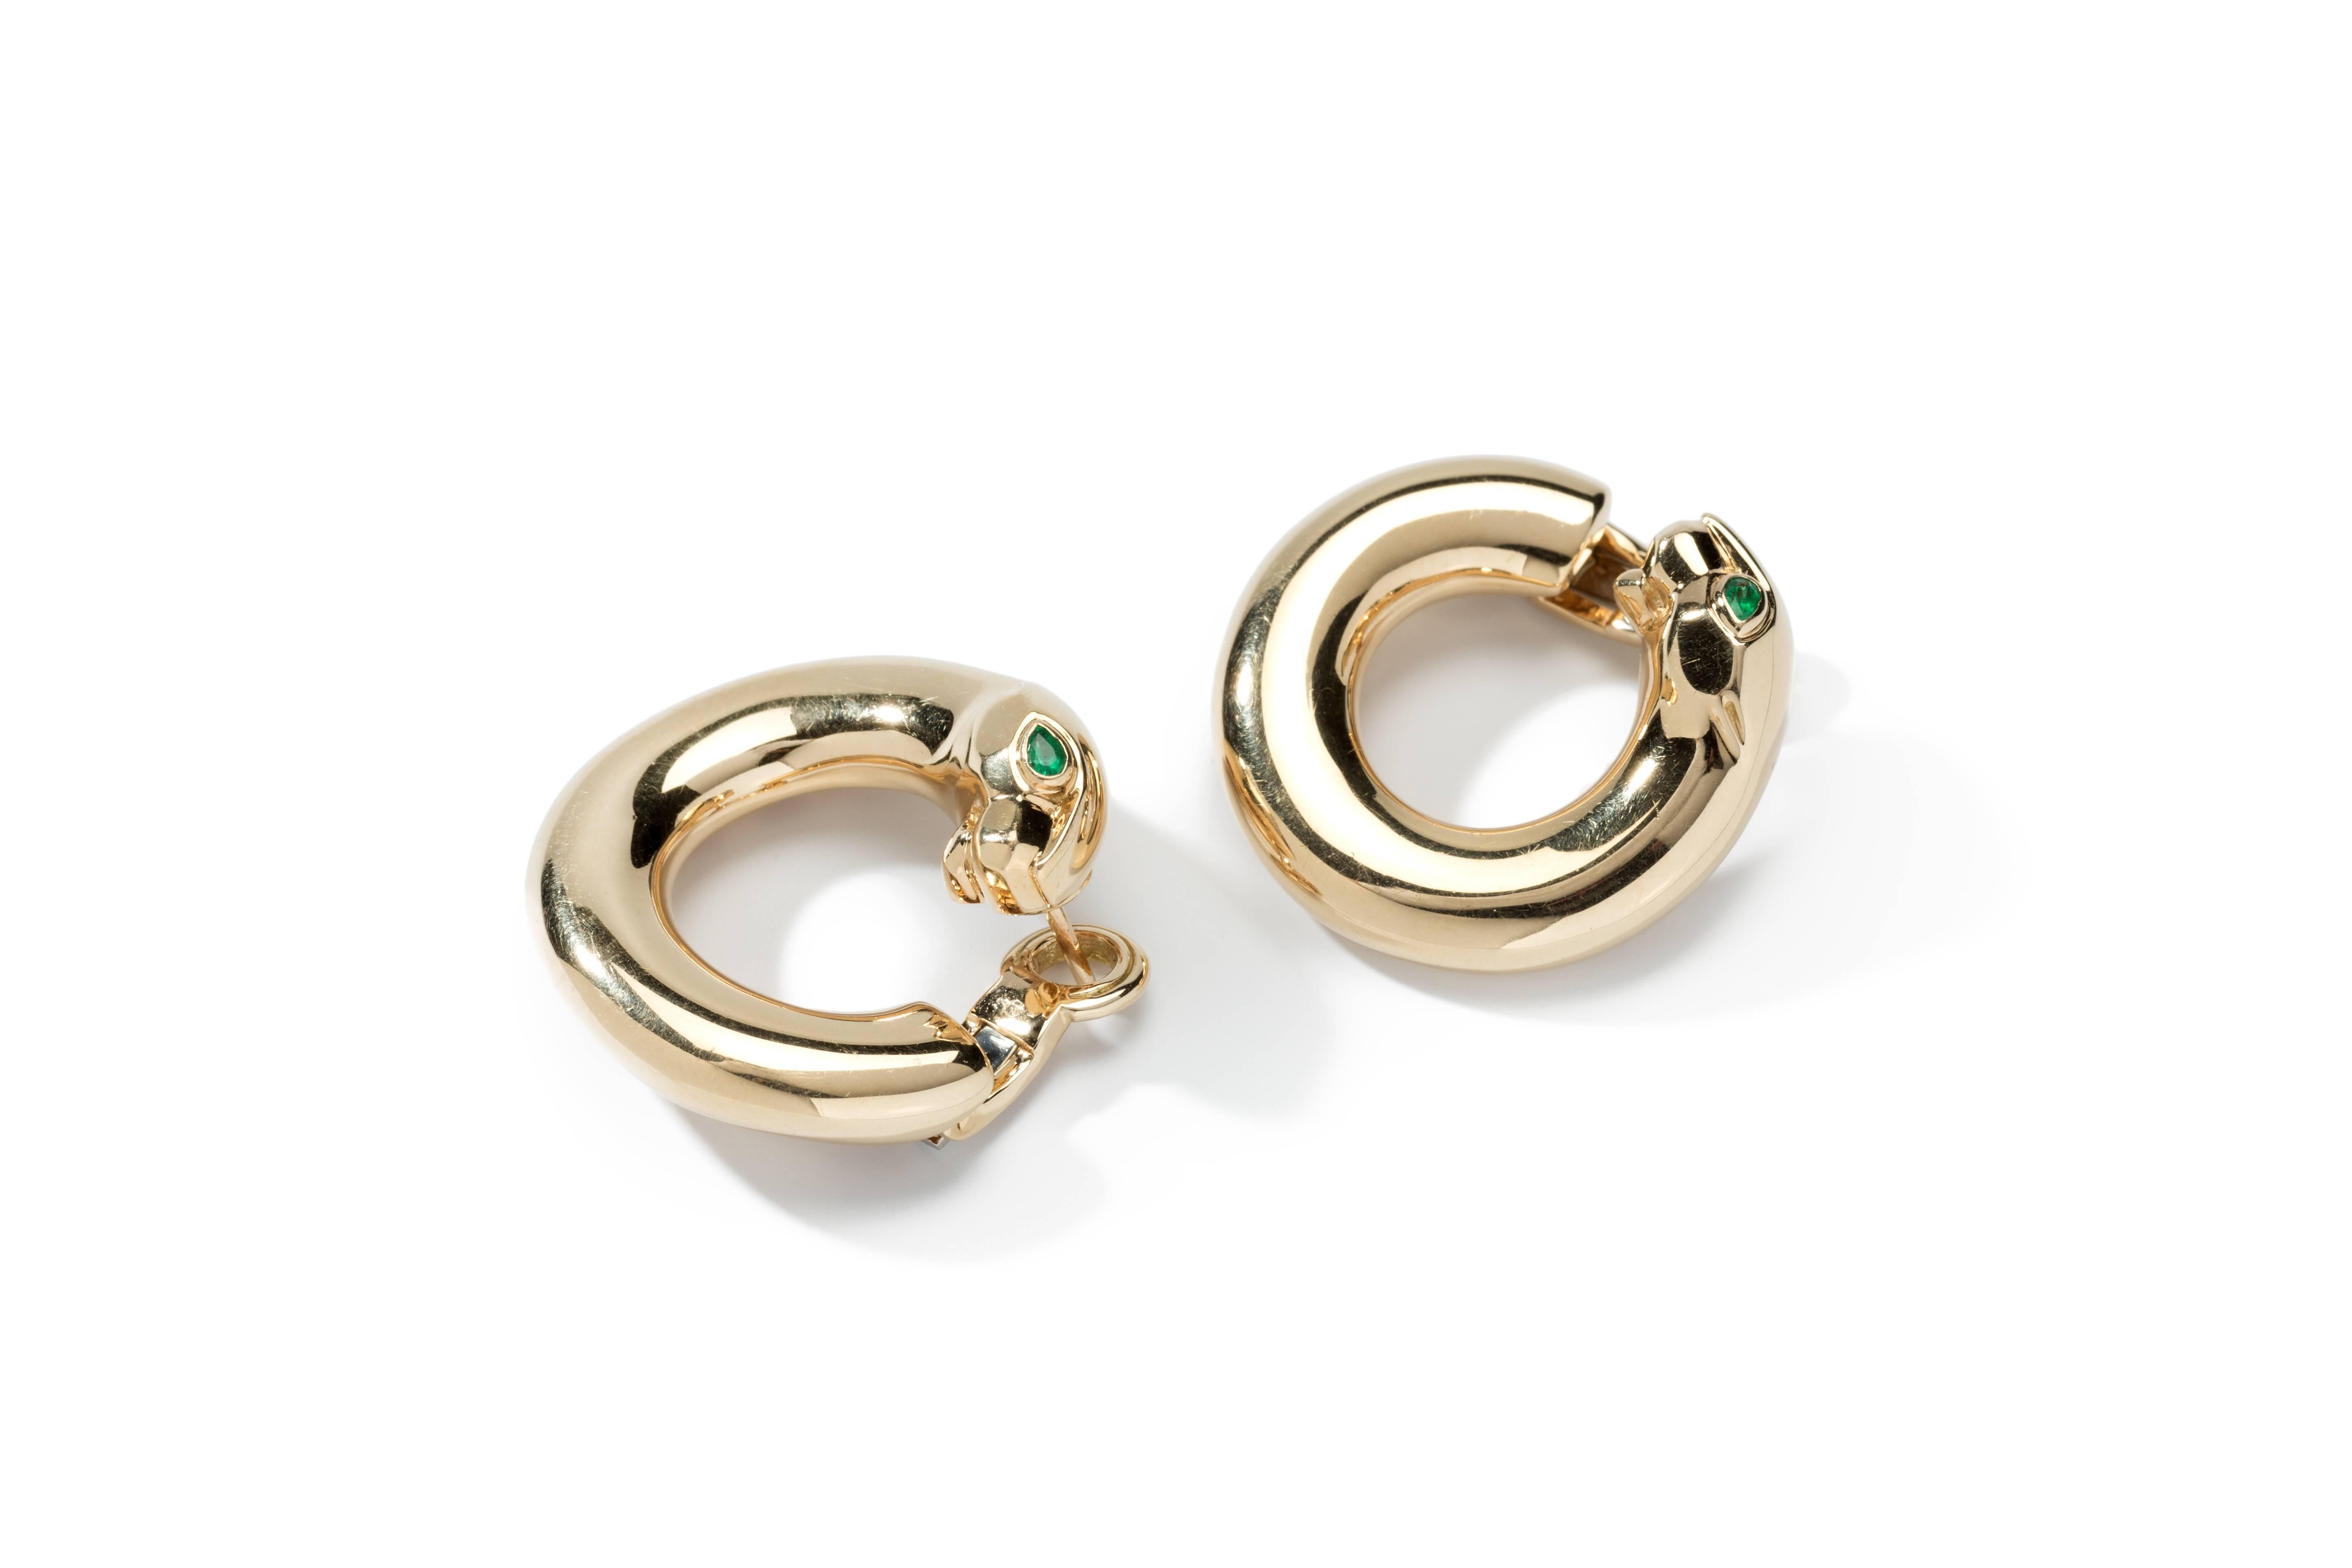 Modelled as a hoop with panther head, pear-shaped emerald eye. In 18 K yellow gold. Stamped: Cartier, no. 1966, 750 and hallmarks. 
Total weight: 21,04 g. Diameter: 0.87 in ( 2,2 cm )